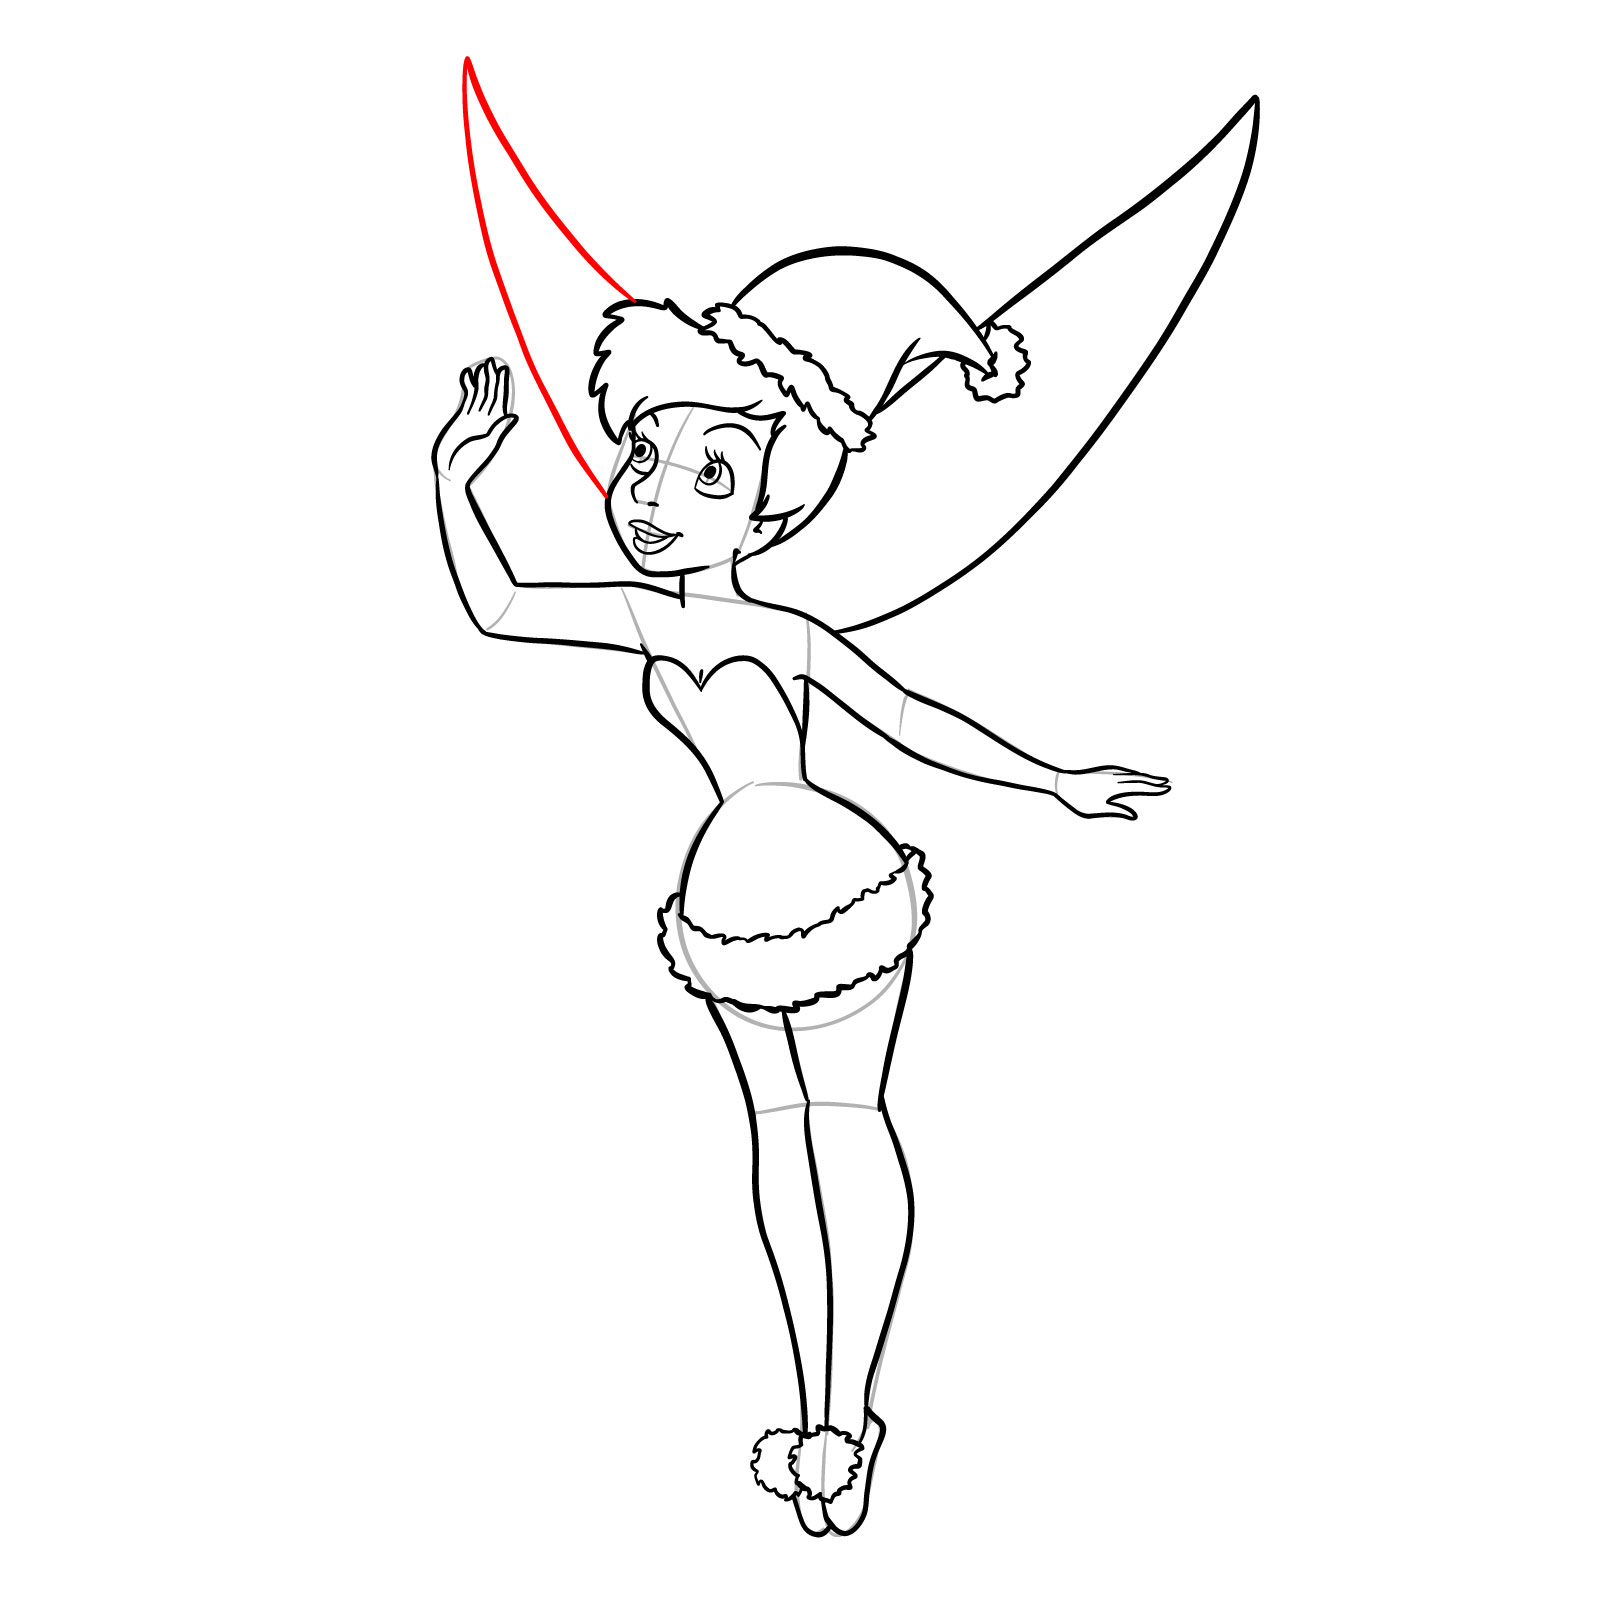 How to draw Tinker Bell in a Christmas costume - step 26